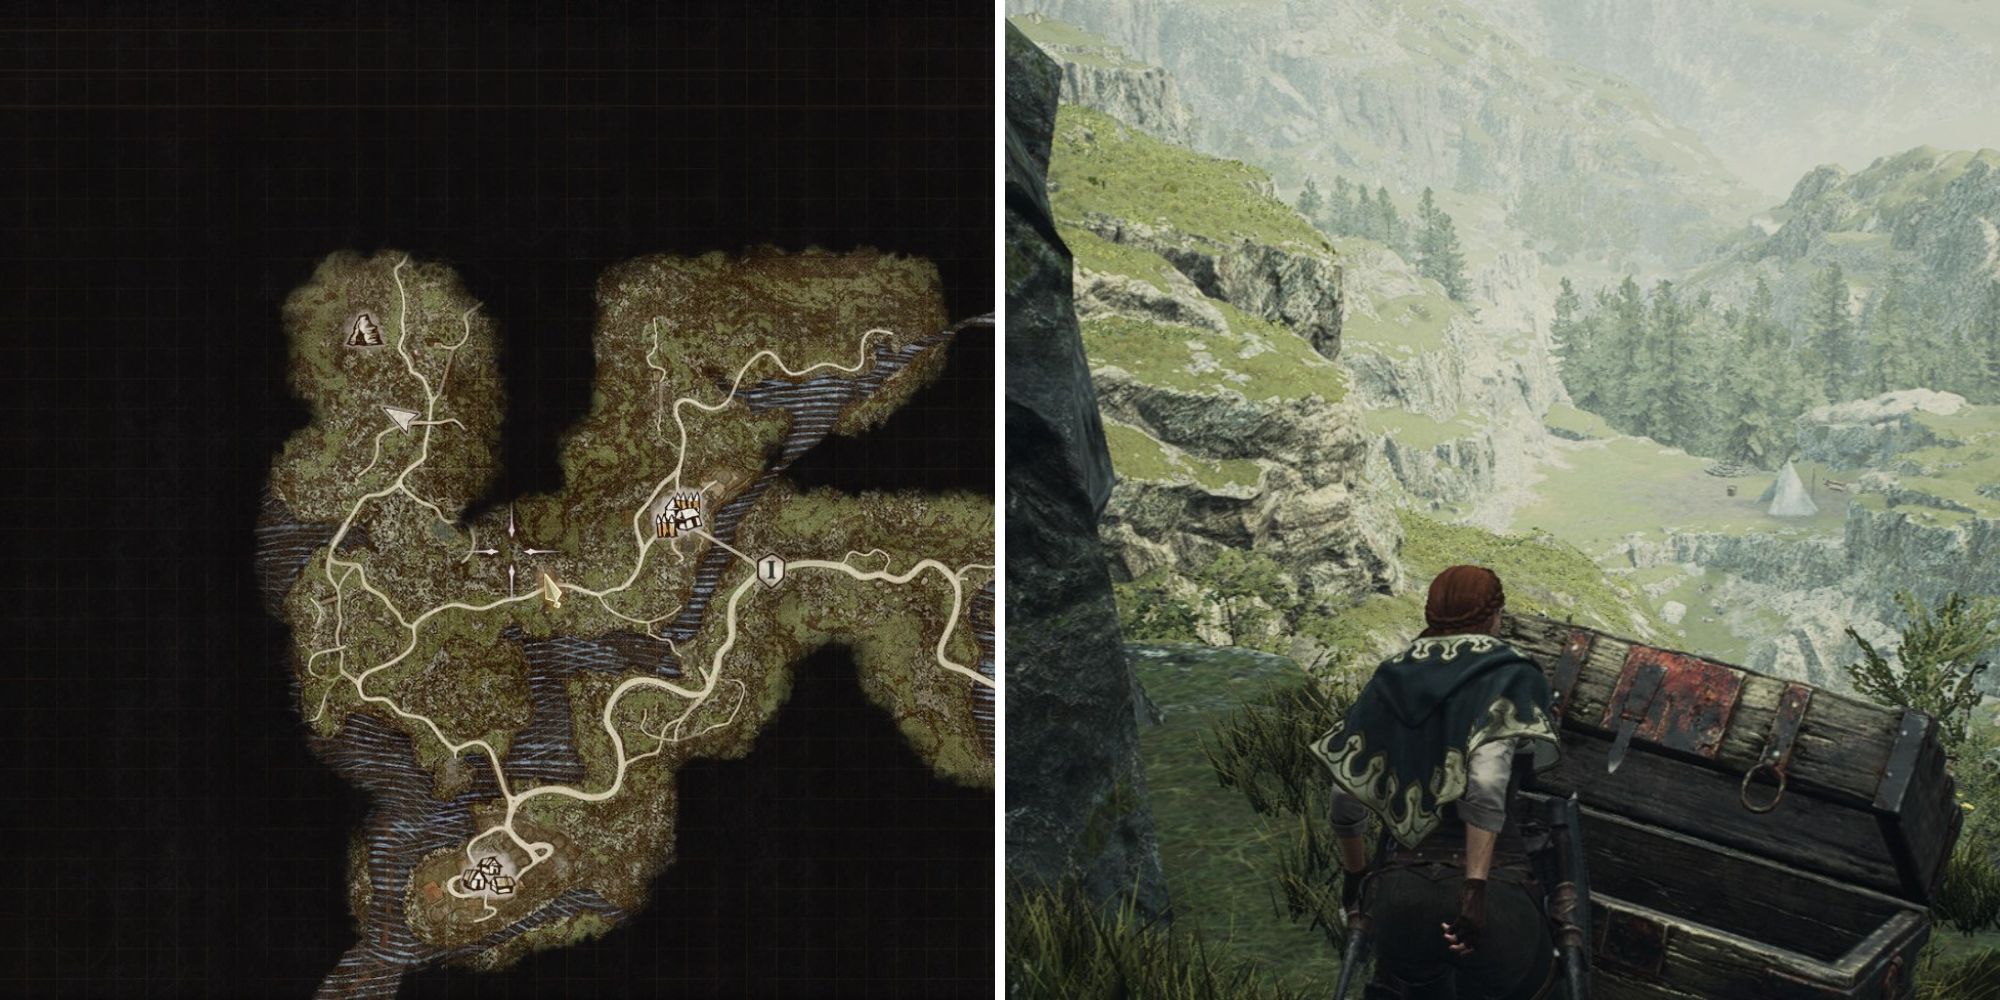 The Dragon's Dogma 2 character found a chest containing a Panacea curative and is displaying their location on the map.